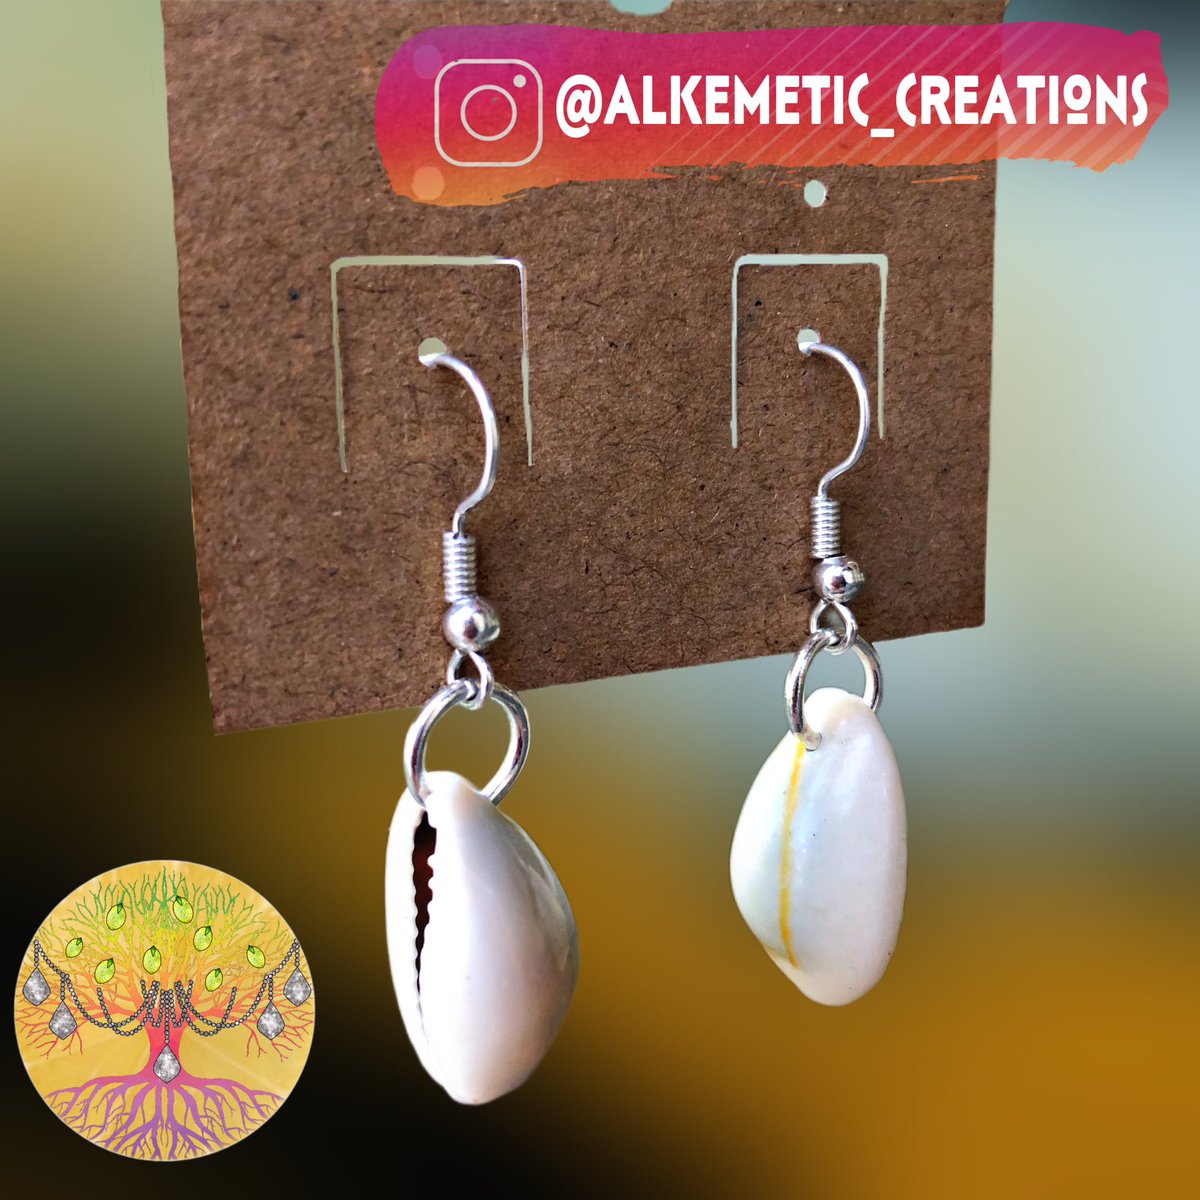 Simple Cowrie Shell 🐚 Dangle Earrings. 

#cowrieshell #shellearrings #crystaljewelry #healingjewelry #crystals #smallbusinessowners #shopblackowned #blackbusinesswomen #blackbusinessowner #entrepreneur #spiritual #consciousness #healing #followme #alkemeticcreations